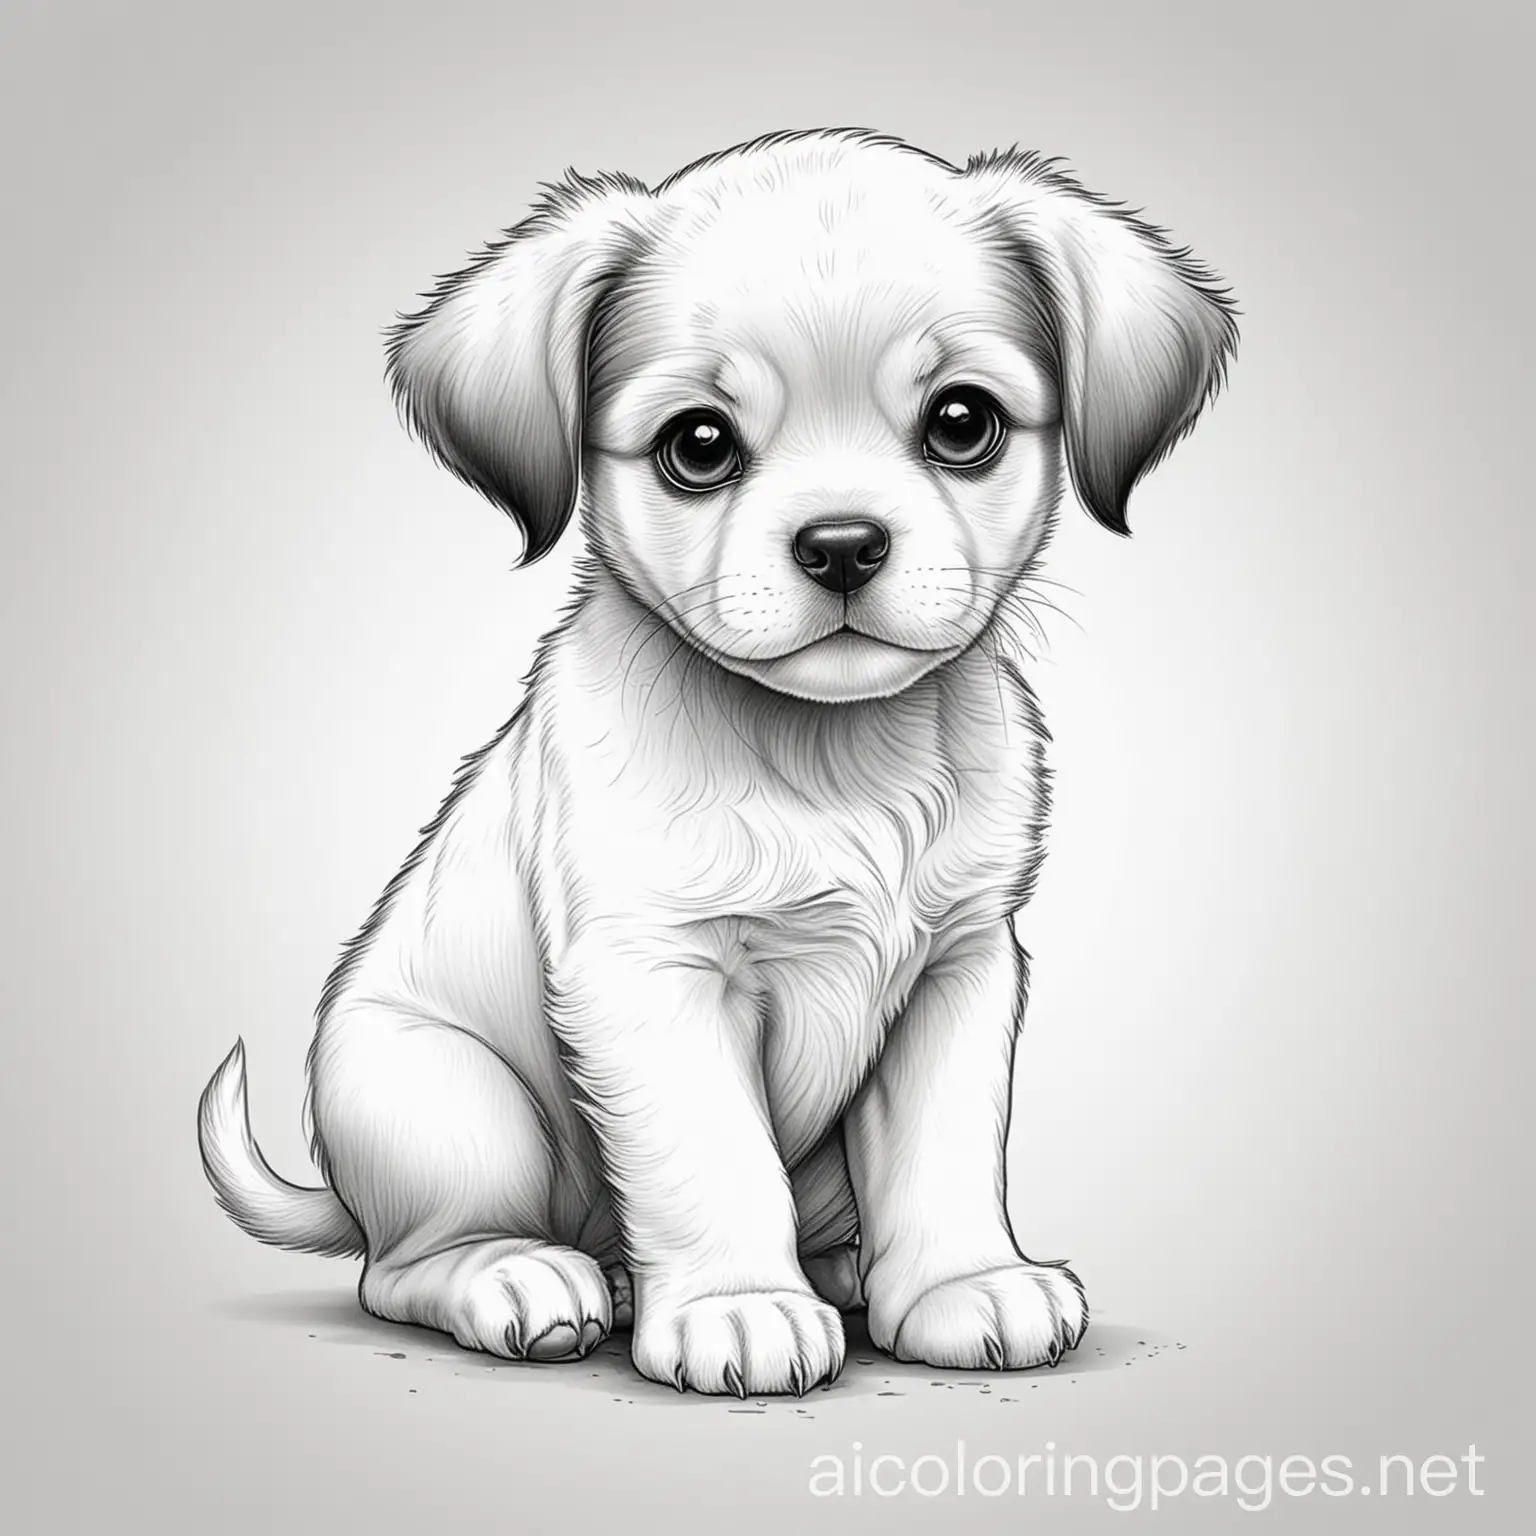 Adorable-Puppy-Coloring-Page-Simple-Line-Art-on-White-Background